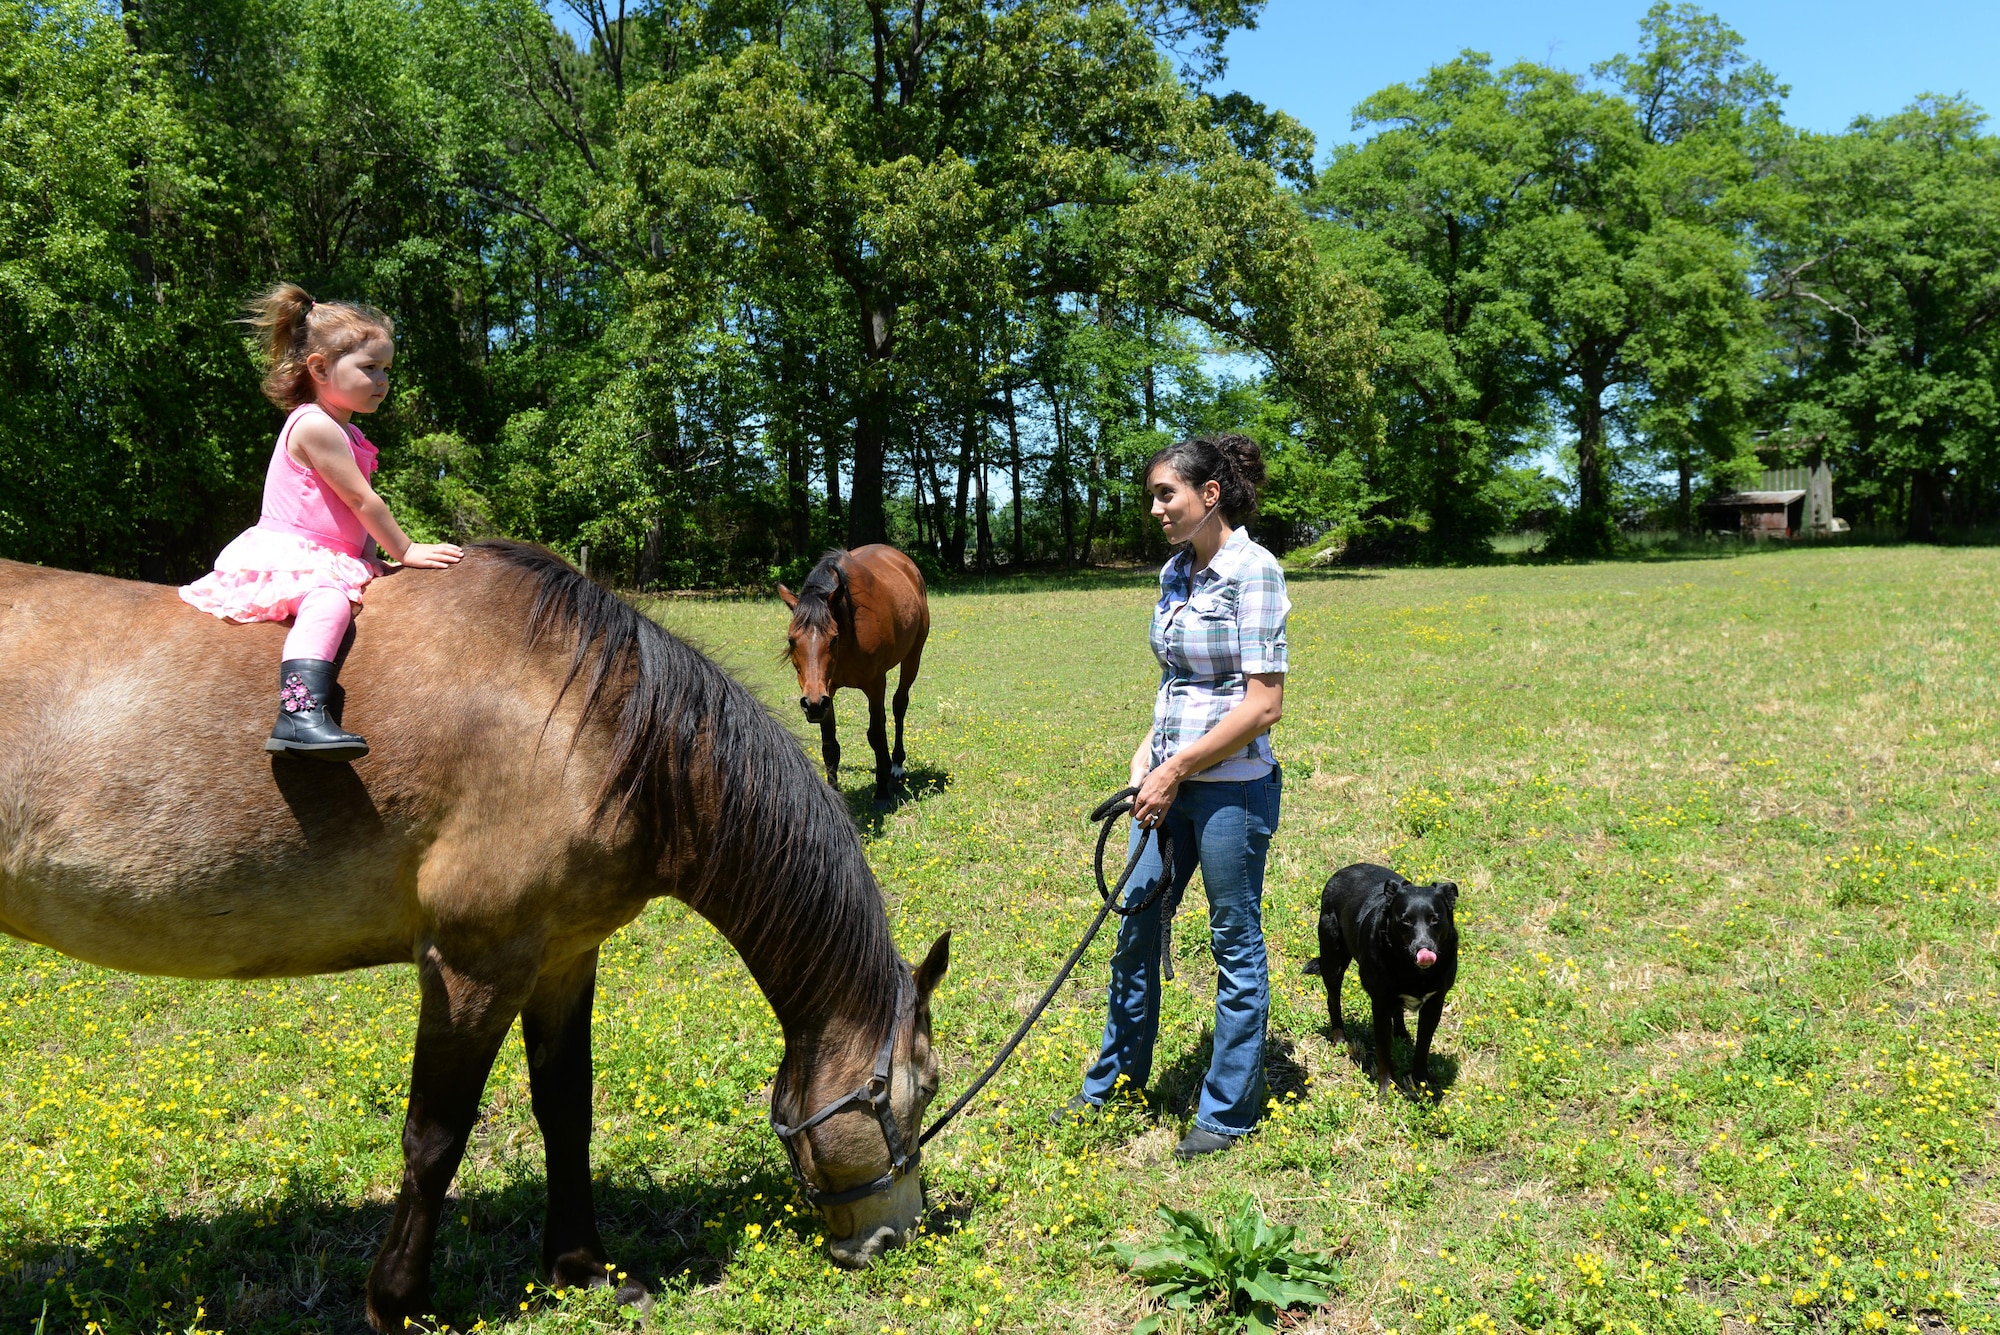 Staff Sgt. Katrina Rubisch, 4th Equipment Maintenance Squadron aircraft armament systems technician, socializes with her child and horses, March 24, 2016, in Goldsboro, North Carolina. Rubisch often brings her child to the stables to share her love of horses with her child. (U.S. Air Force photo by Airman 1st Class Ashley Williamson/Released)